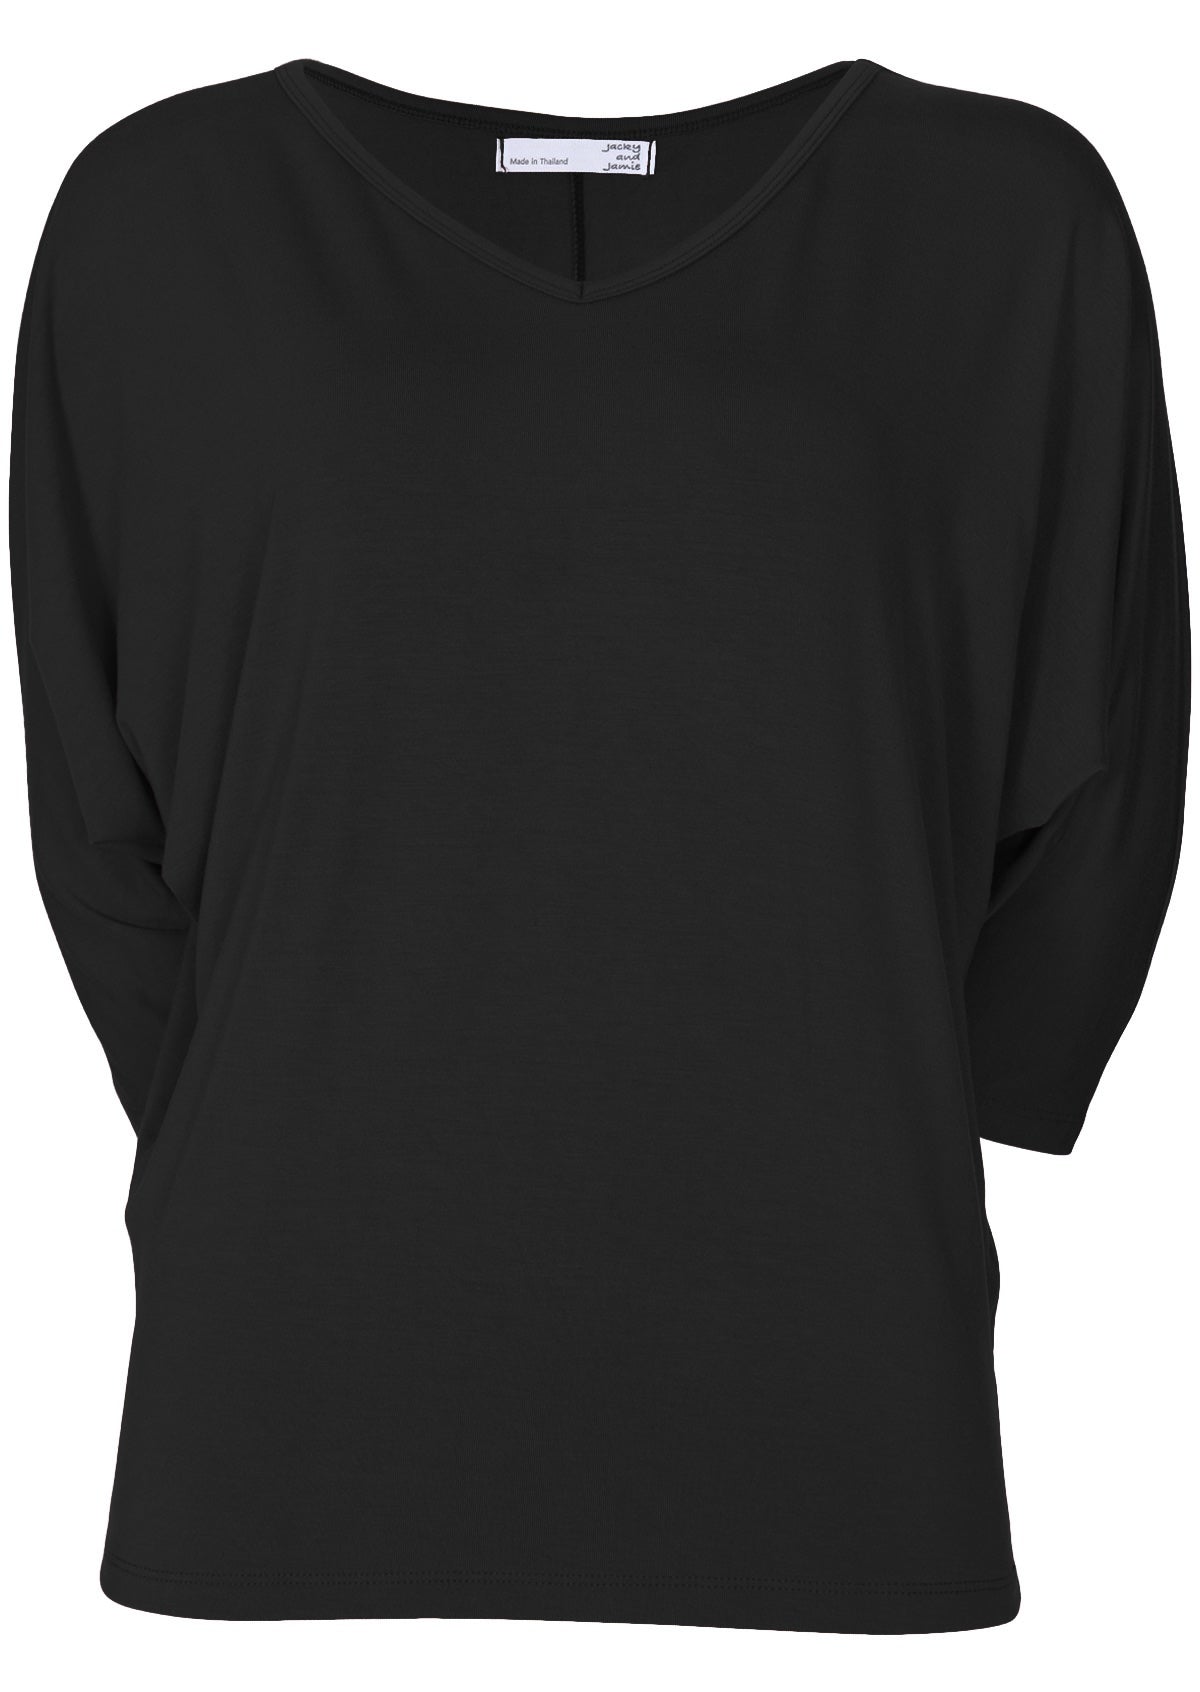 Front view of women's 3/4 sleeve rayon batwing v-neck black top.